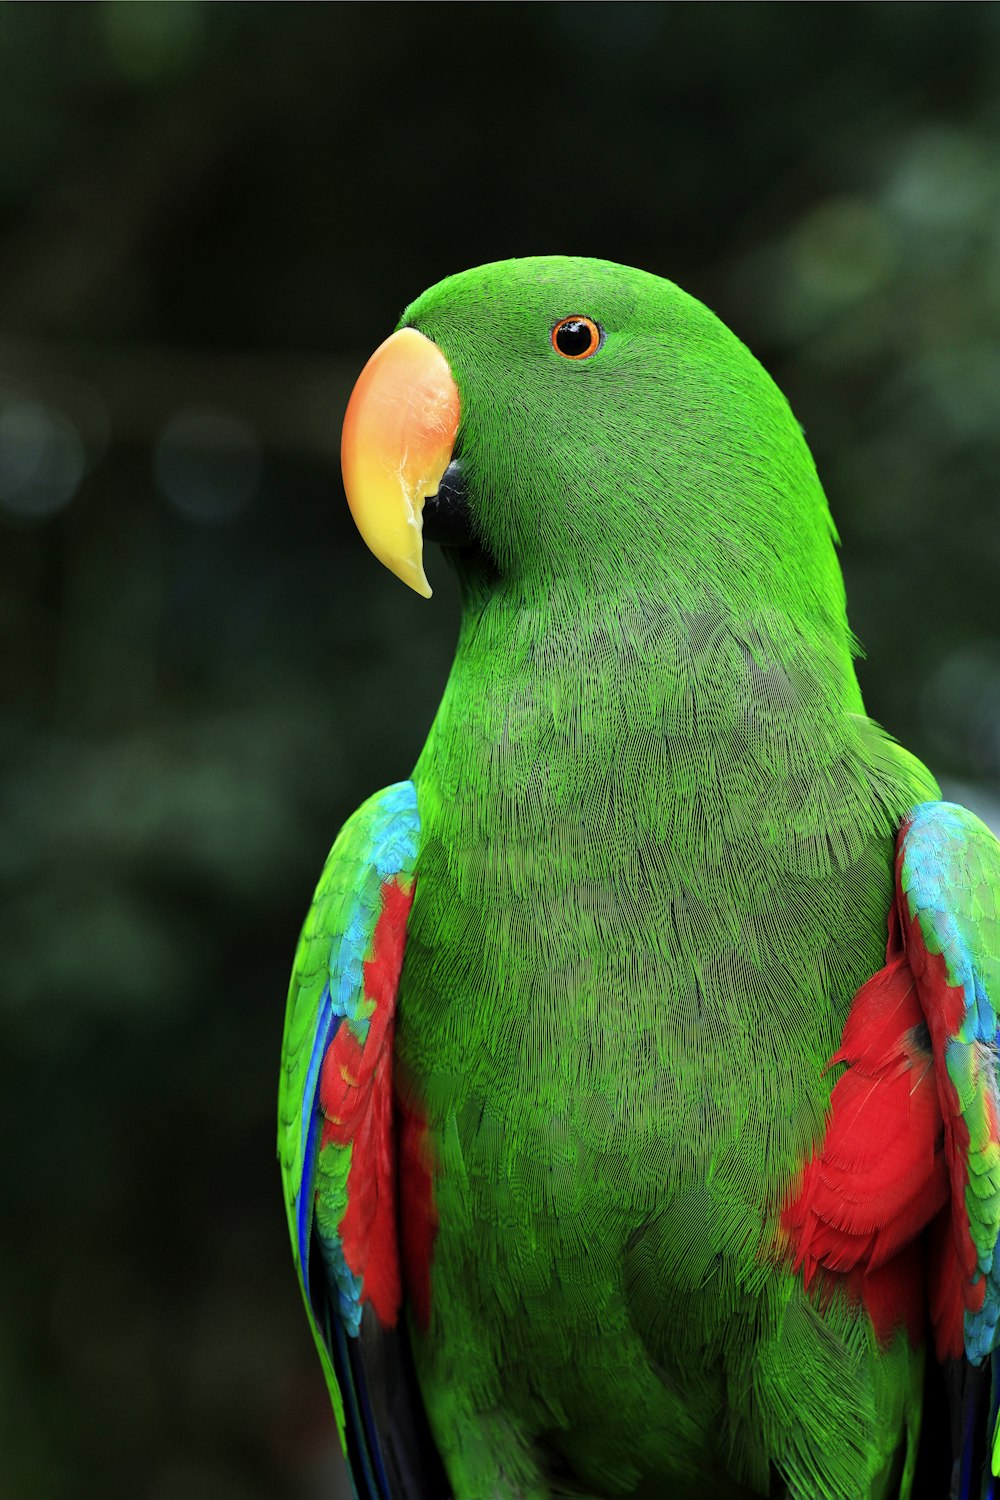 a green parrot with red and blue feathers